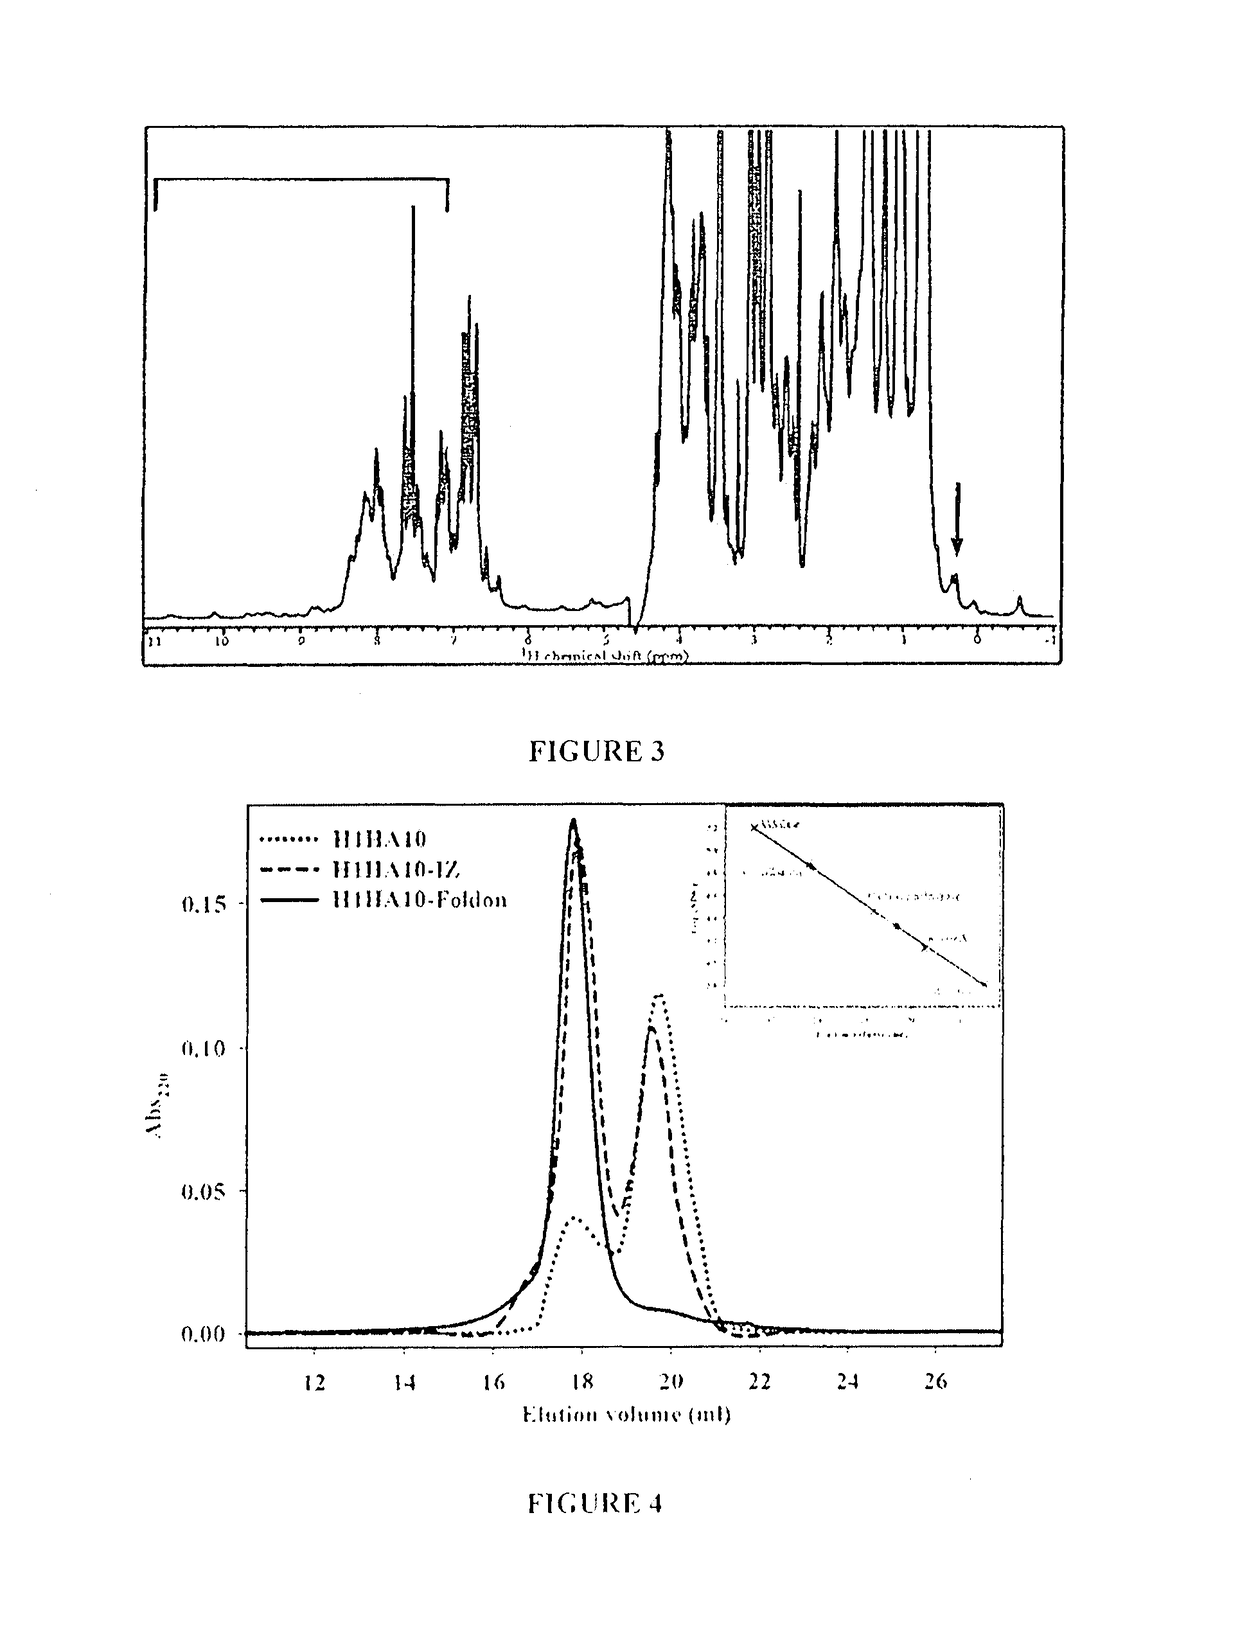 Polypeptides for generating Anti-influenza antibodies and uses thereof